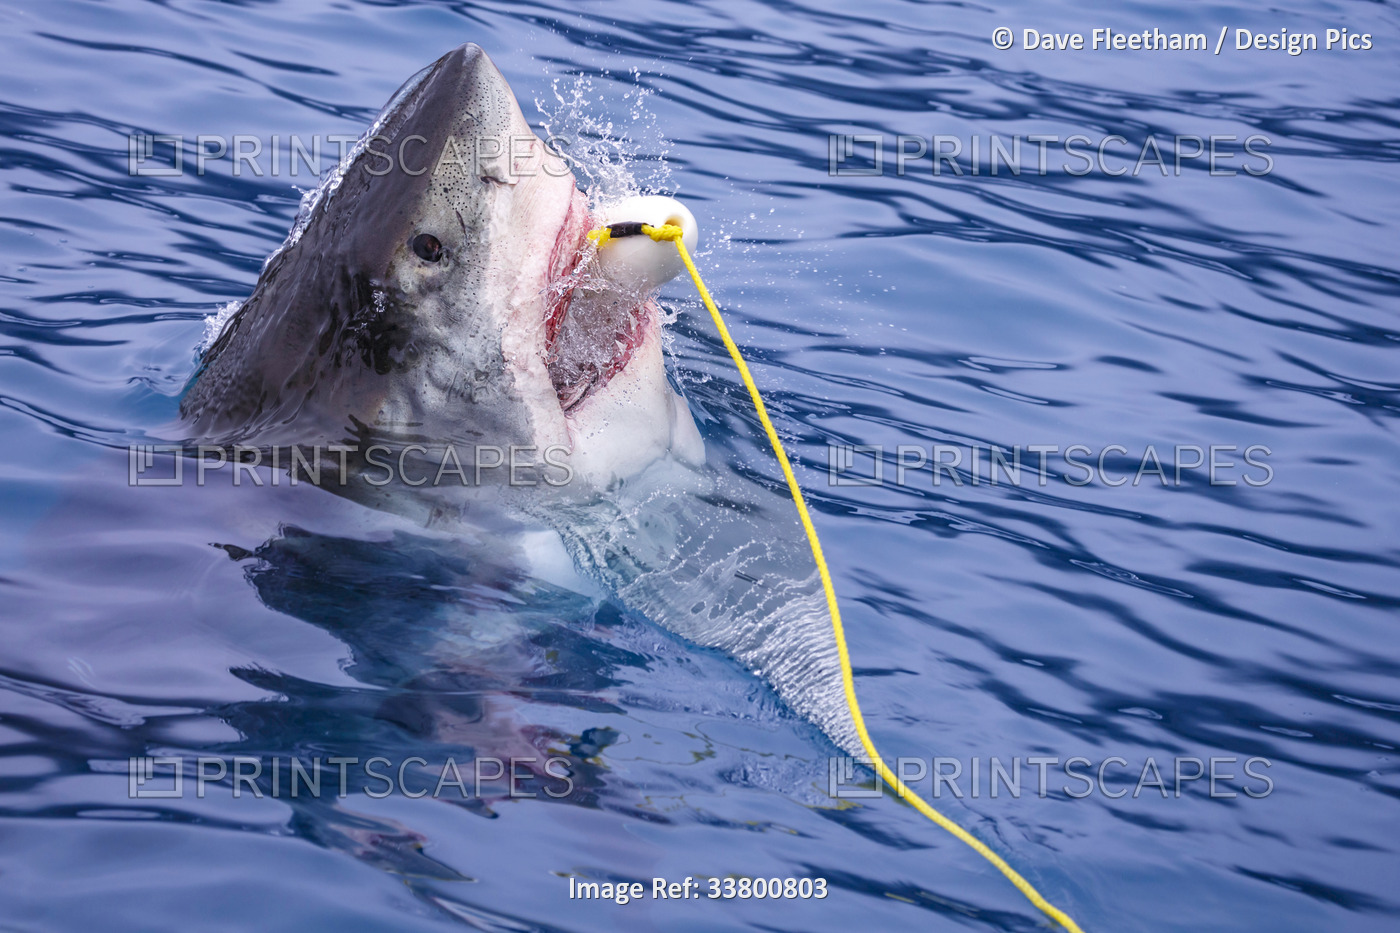 This Great White Shark (Carcharodon carcharias) was photographed biting a bait ...